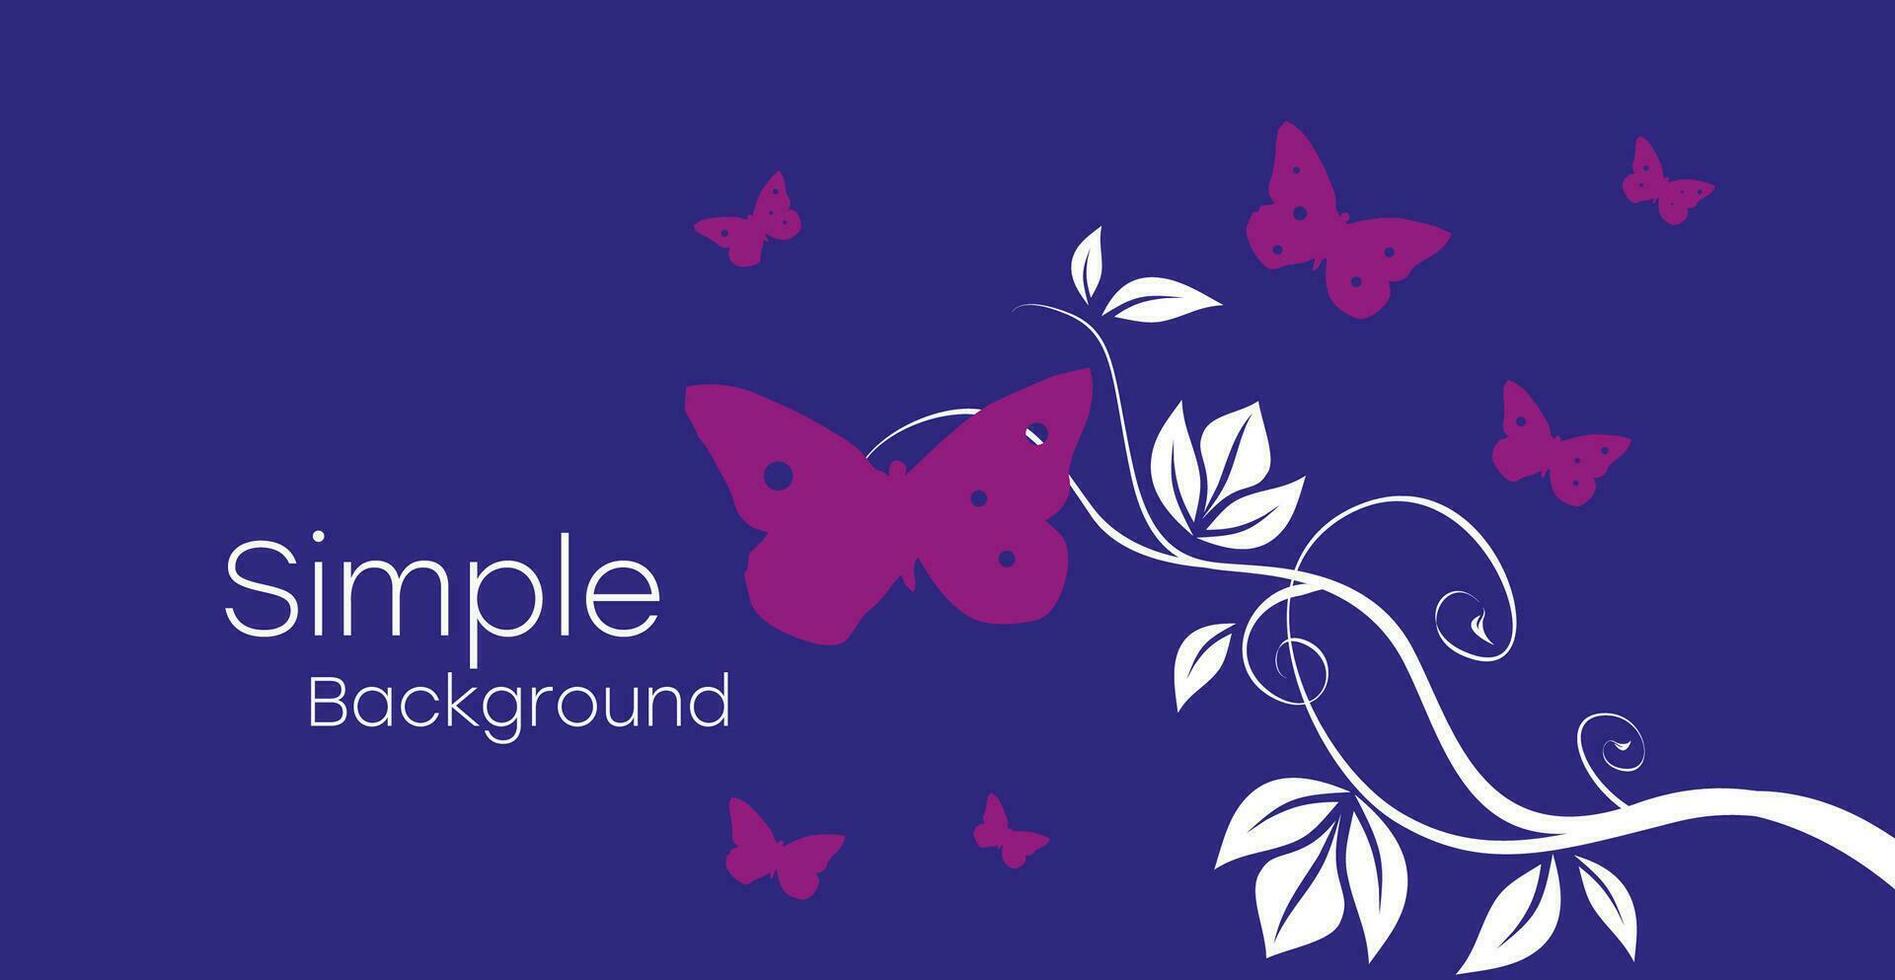 Simple background with butterflies and flower silhouettes. Template for presentation, invitation, business card of a beauty salon. vector